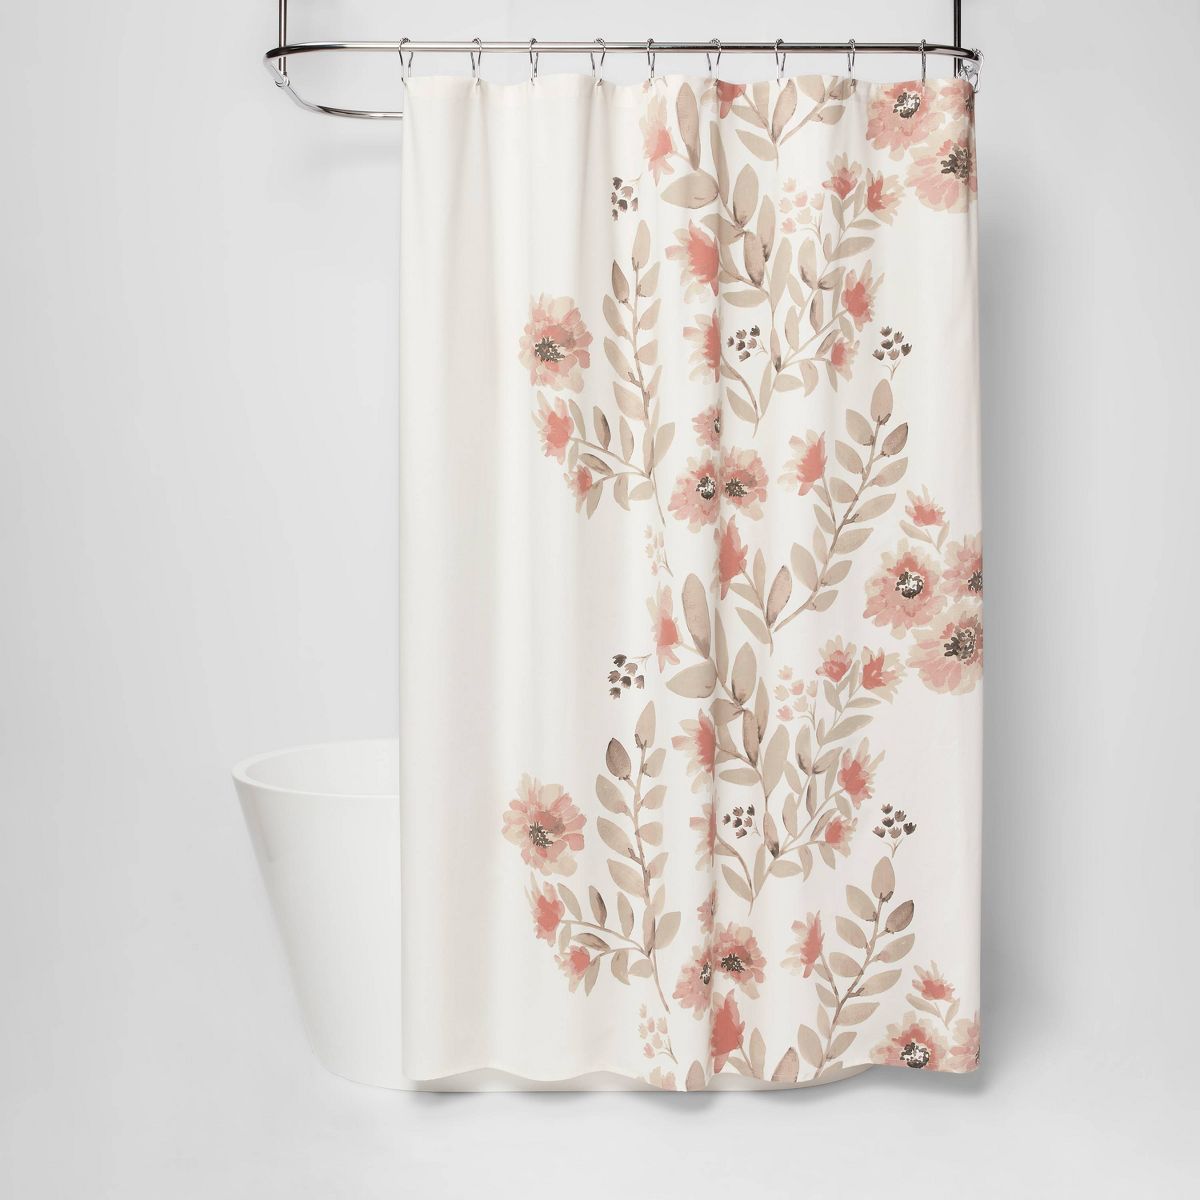 Blooms Flat Weave Shower Curtain Coral - Threshold™ | Target